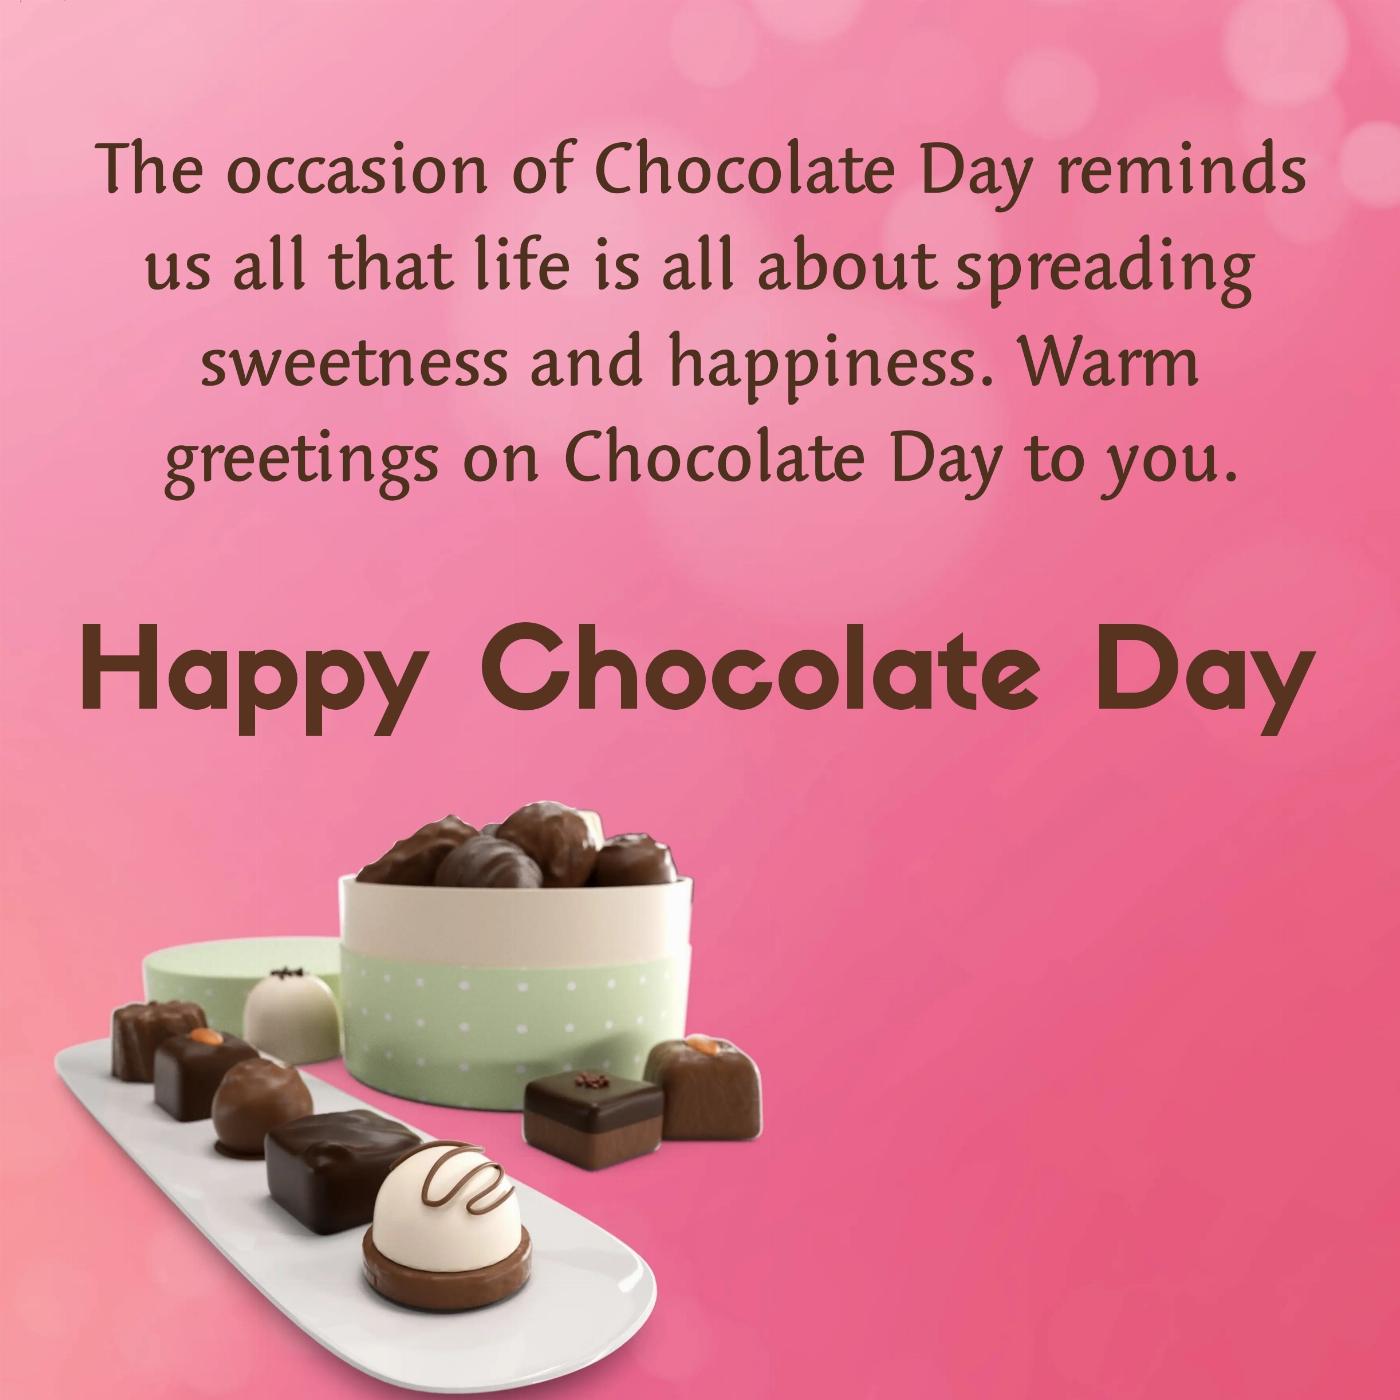 The occasion of Chocolate Day reminds us all